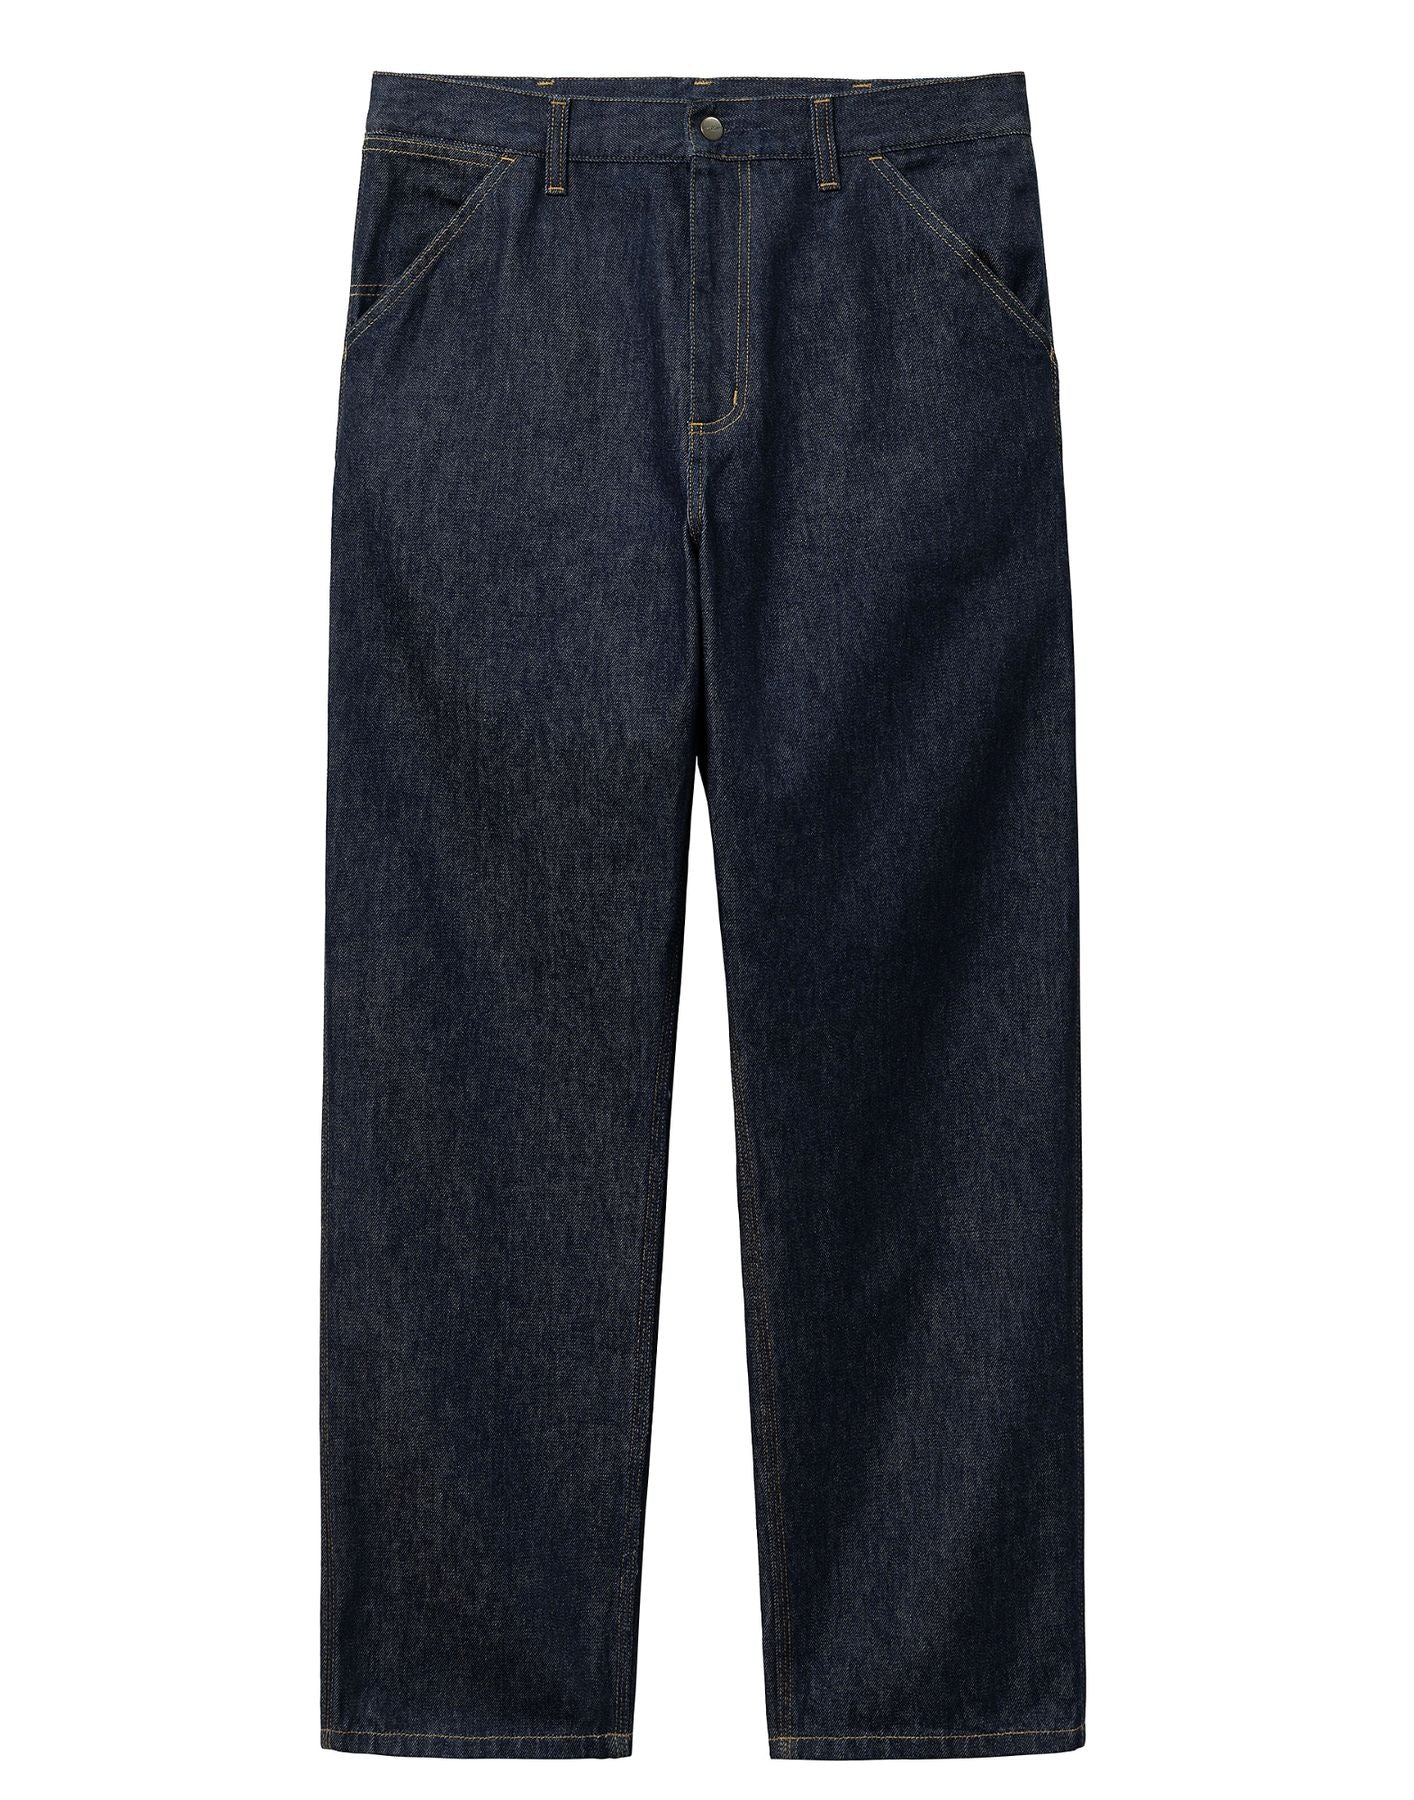 Jeans pour homme i032024 Blue Rinsed CARHARTT WIP